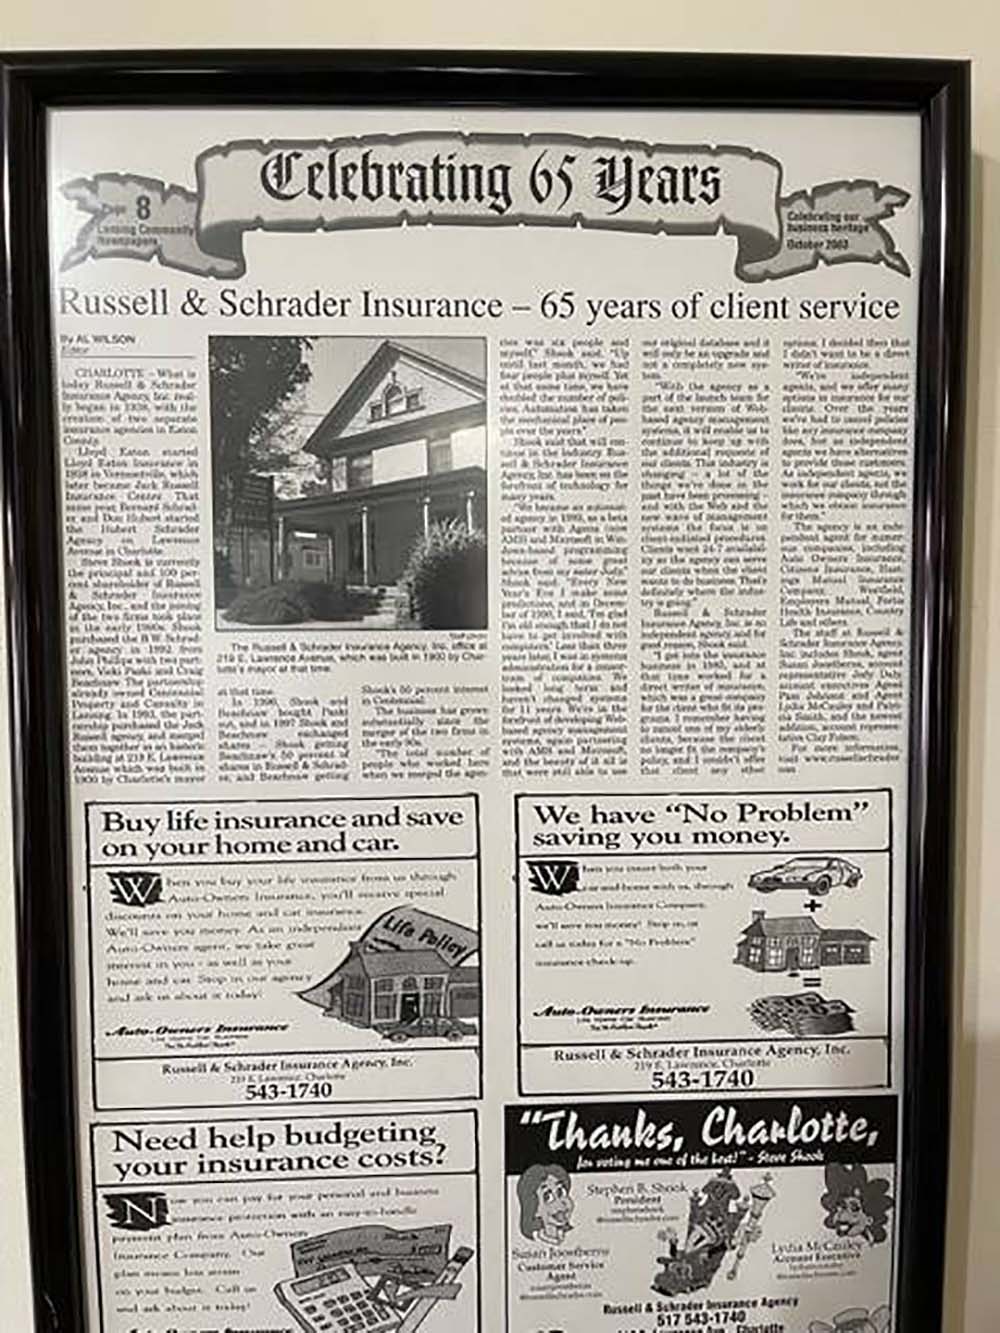 Our History - Old Framed Newspaper Article Featuring Russell & Schrader Insurance with Image of Office Building